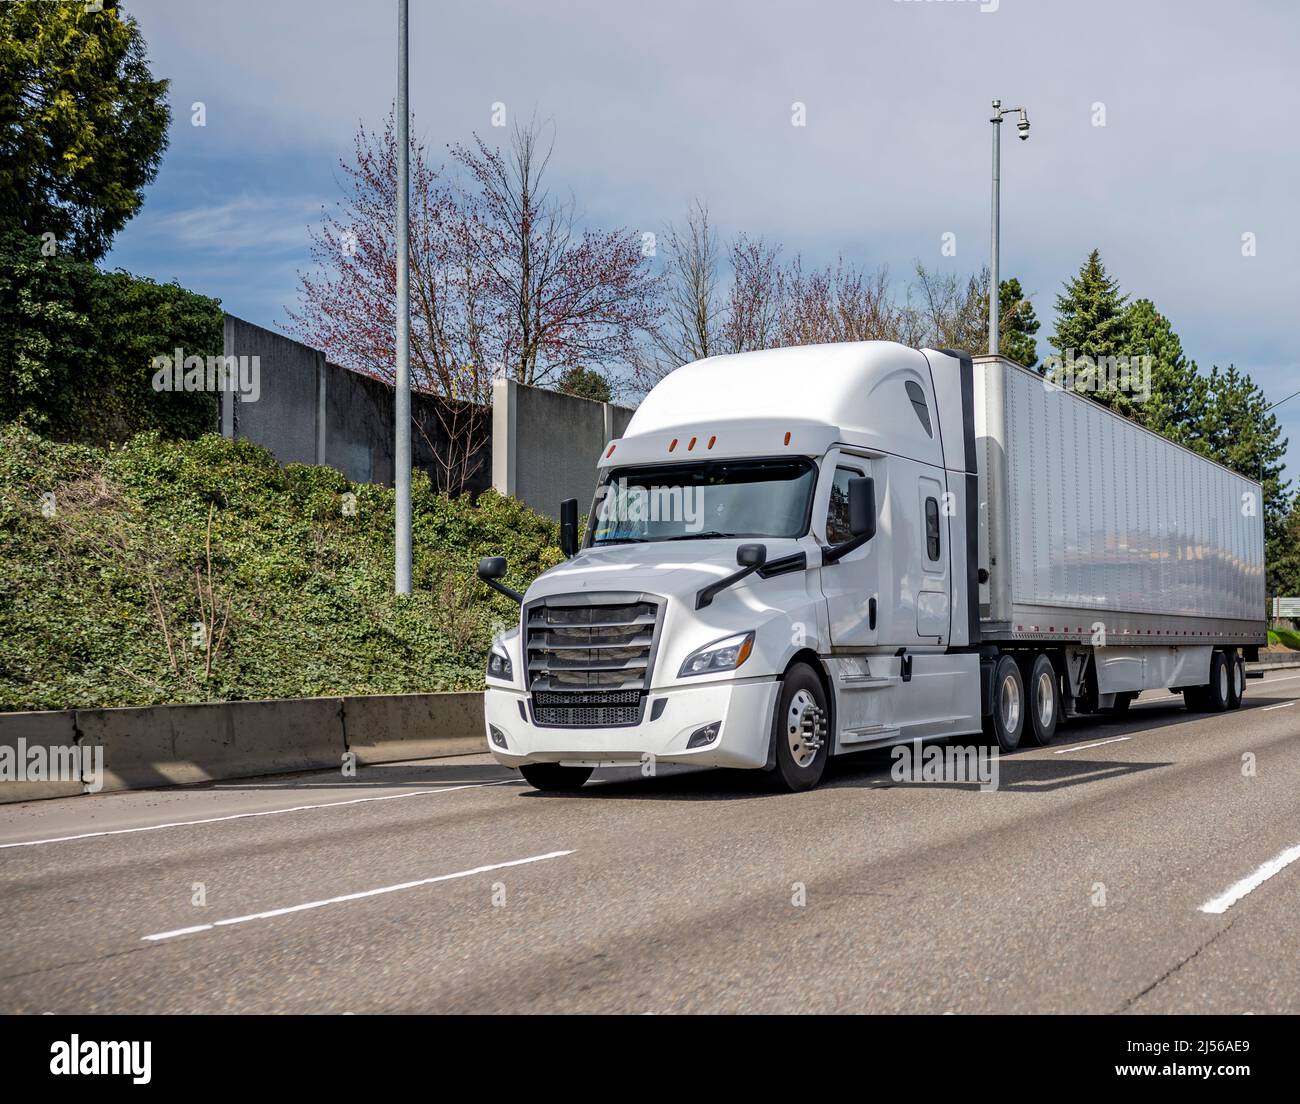 Industrial powerful long haul white big rig semi truck tractor transporting cargo in dry van semi trailer running on the straight wide highway road wi Stock Photo